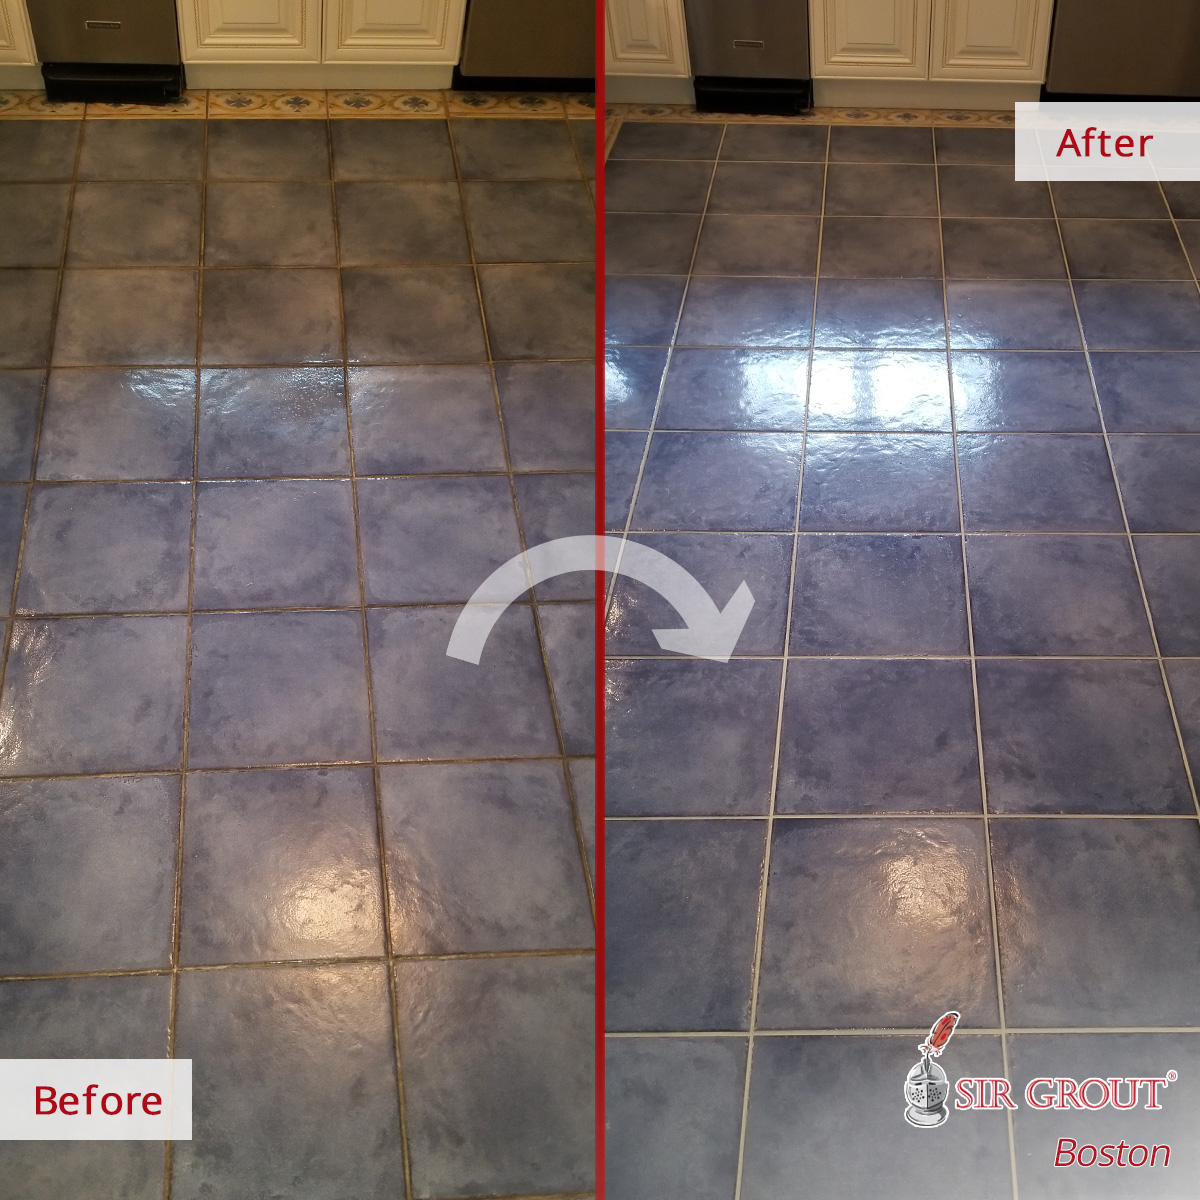 Grout Sealing In Quincy Ma, Sealing Floor Tiles And Grout